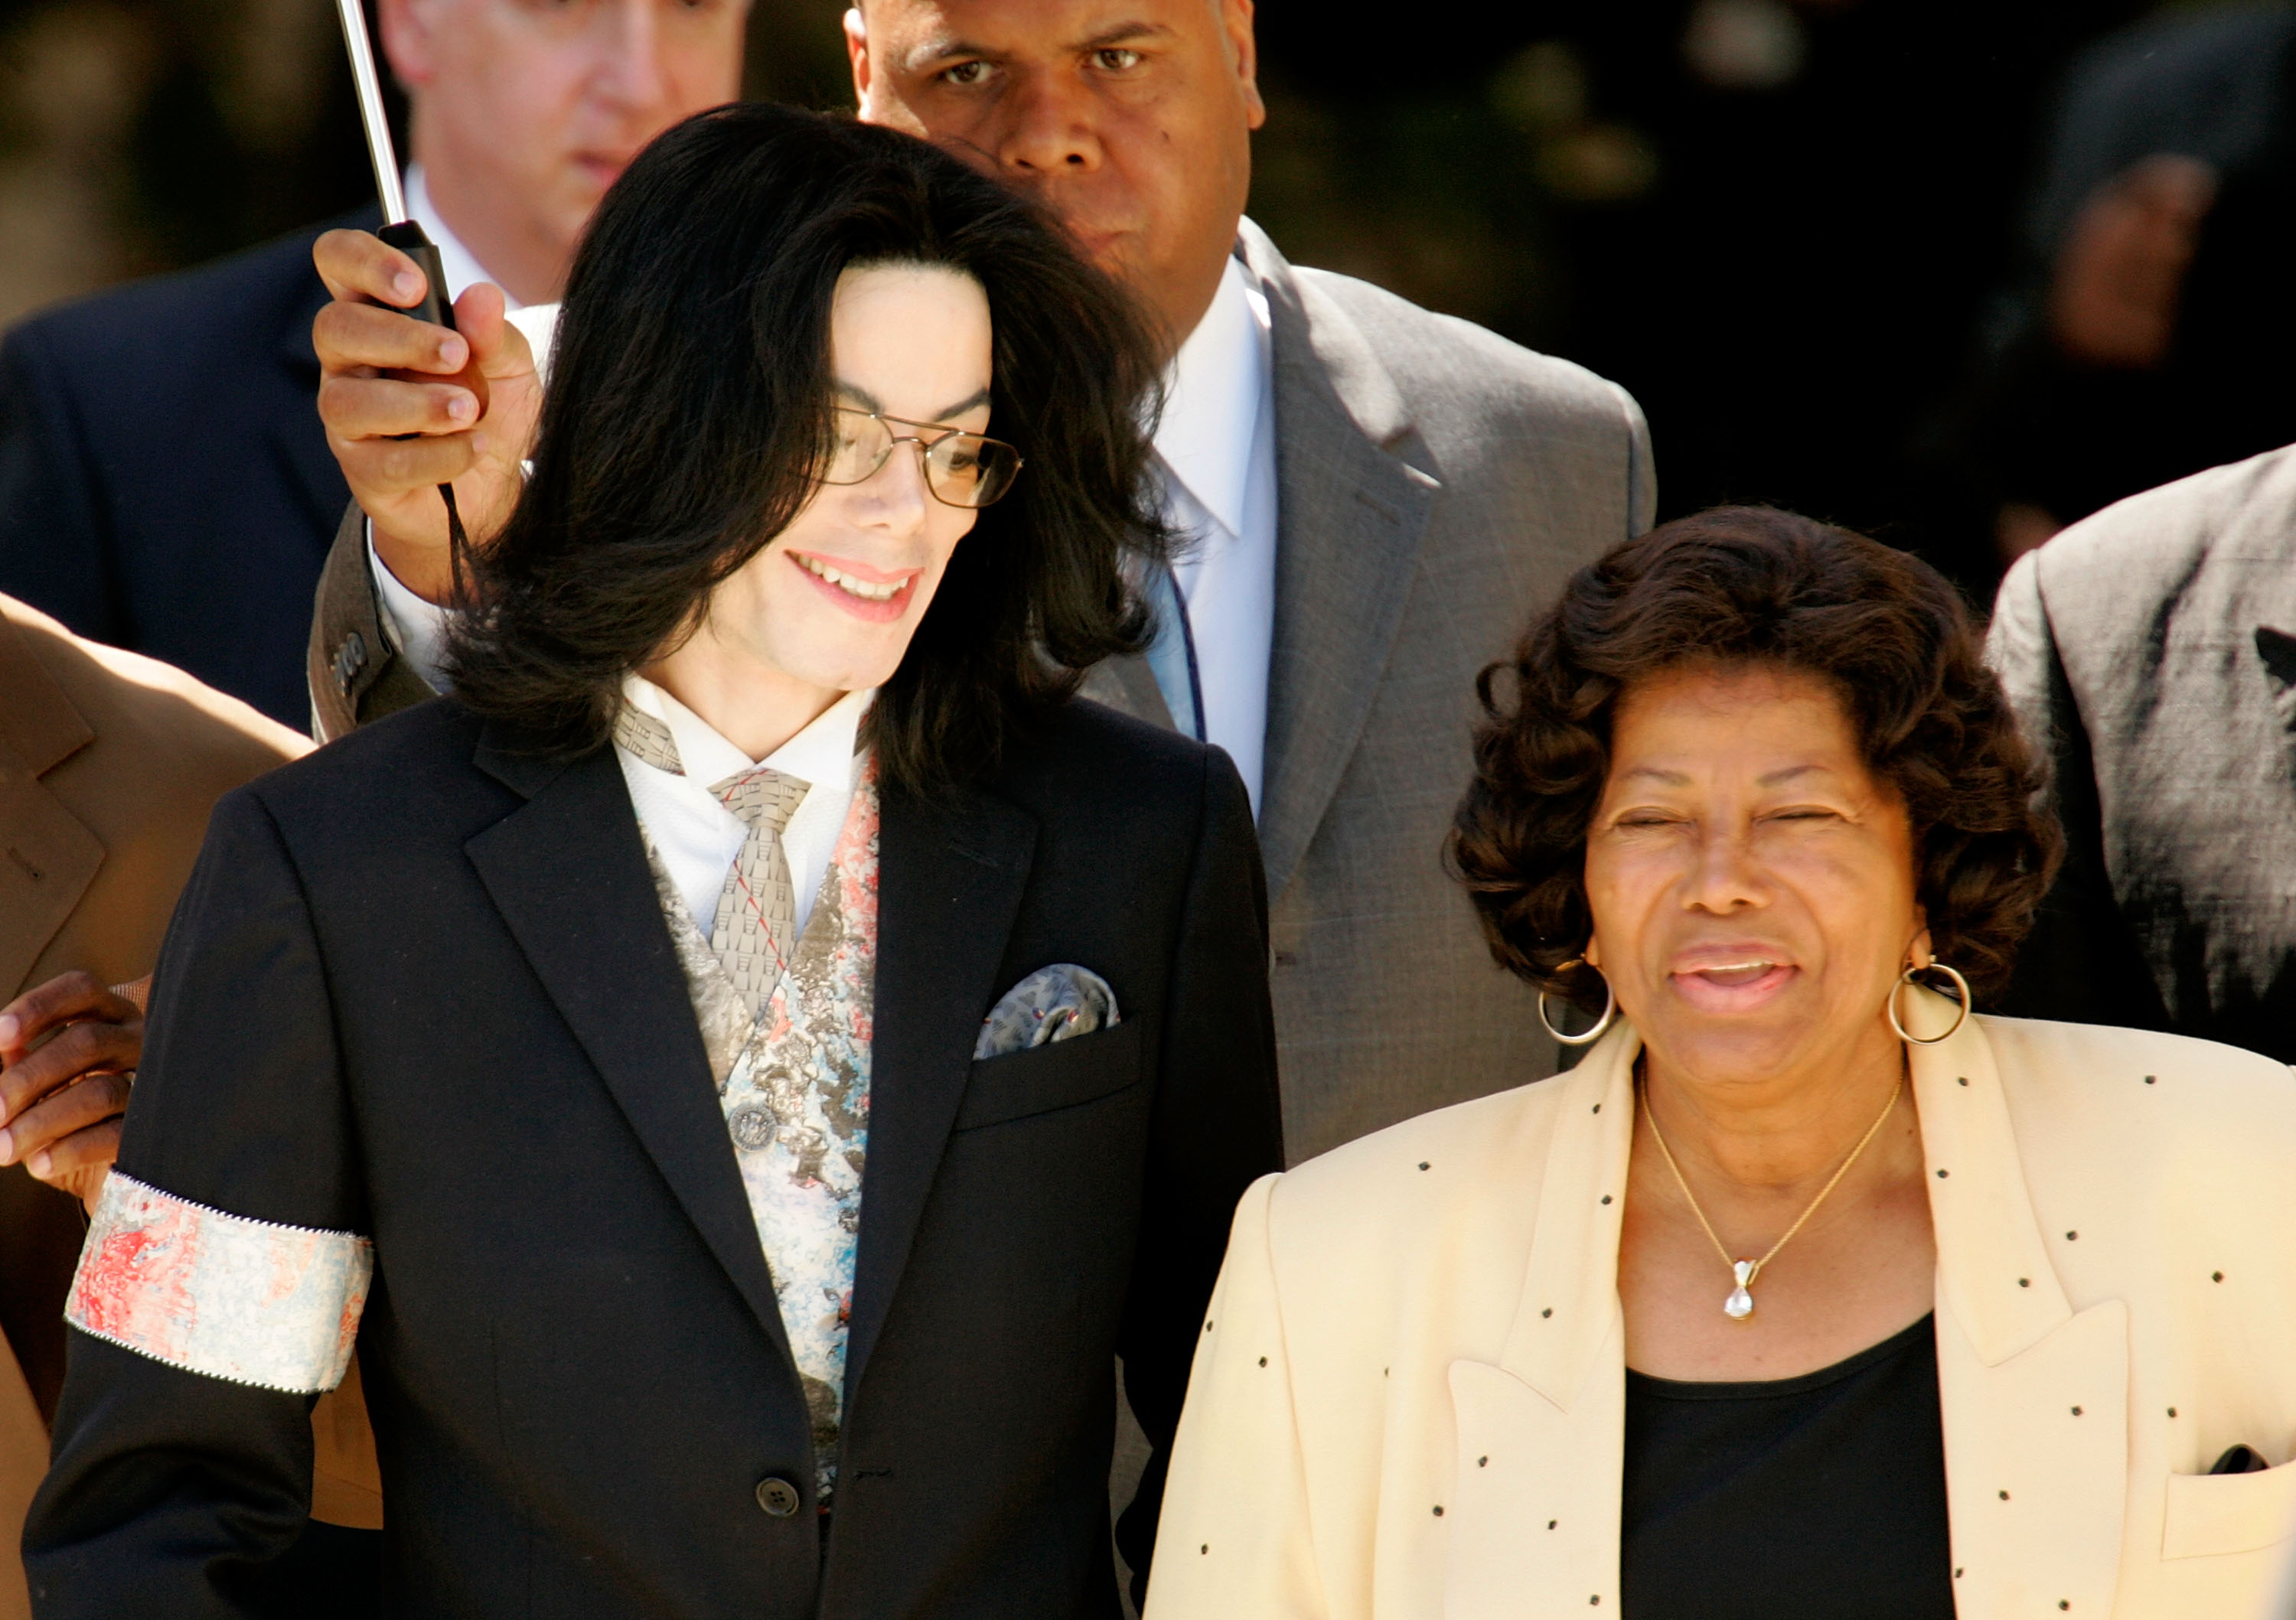 Michael Jackson and his mother Katherine Jackson at the Santa Barbara County courthouse on April 4, 2005, in California. | Source: Getty Images